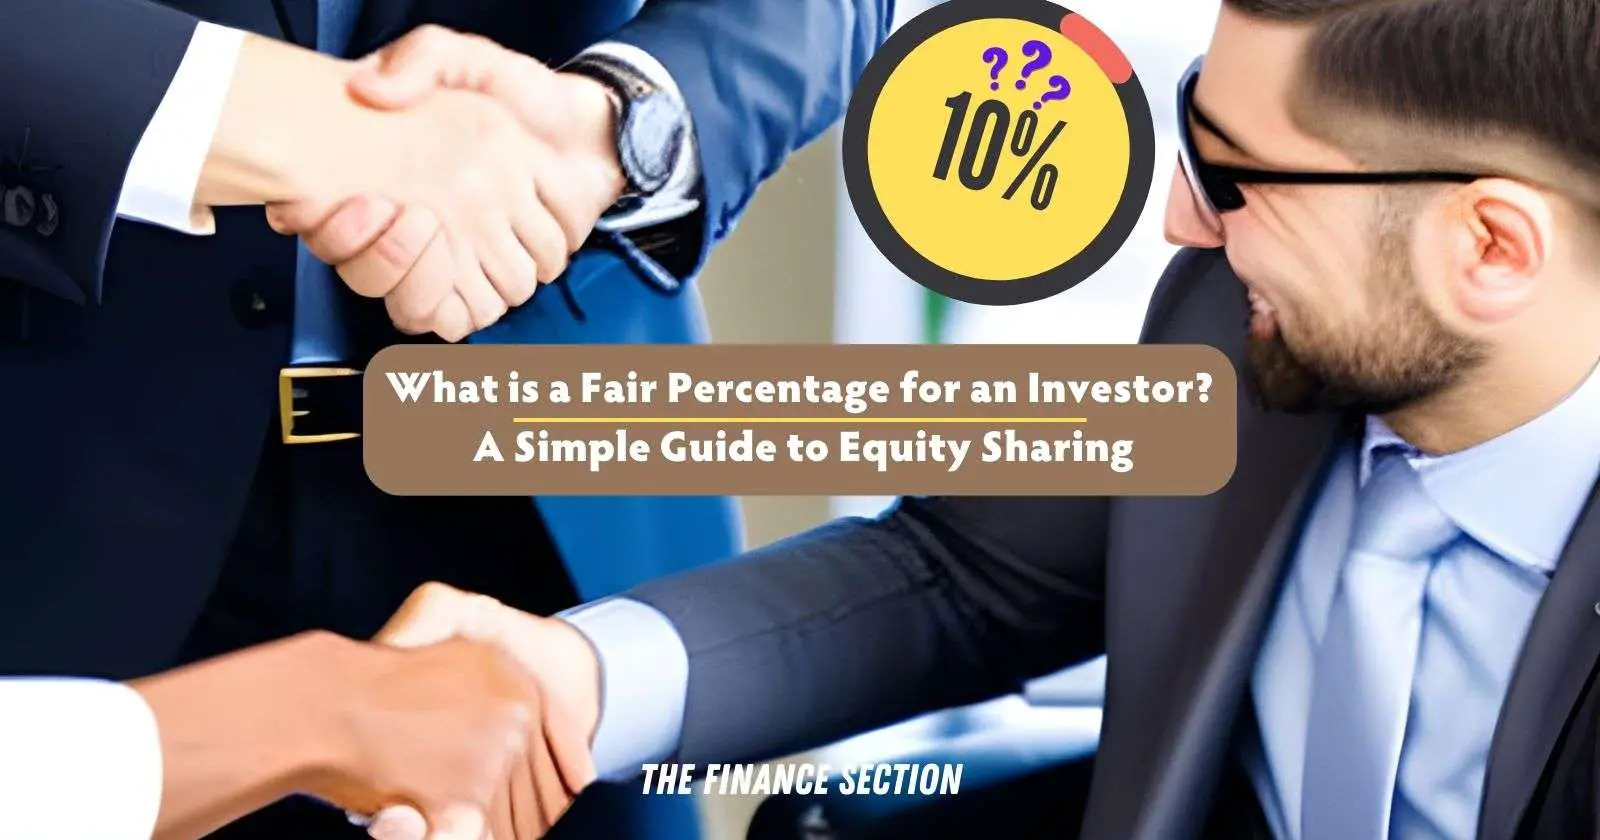 What is a Fair Percentage for an Investor? A Simple Guide to Equity Sharing